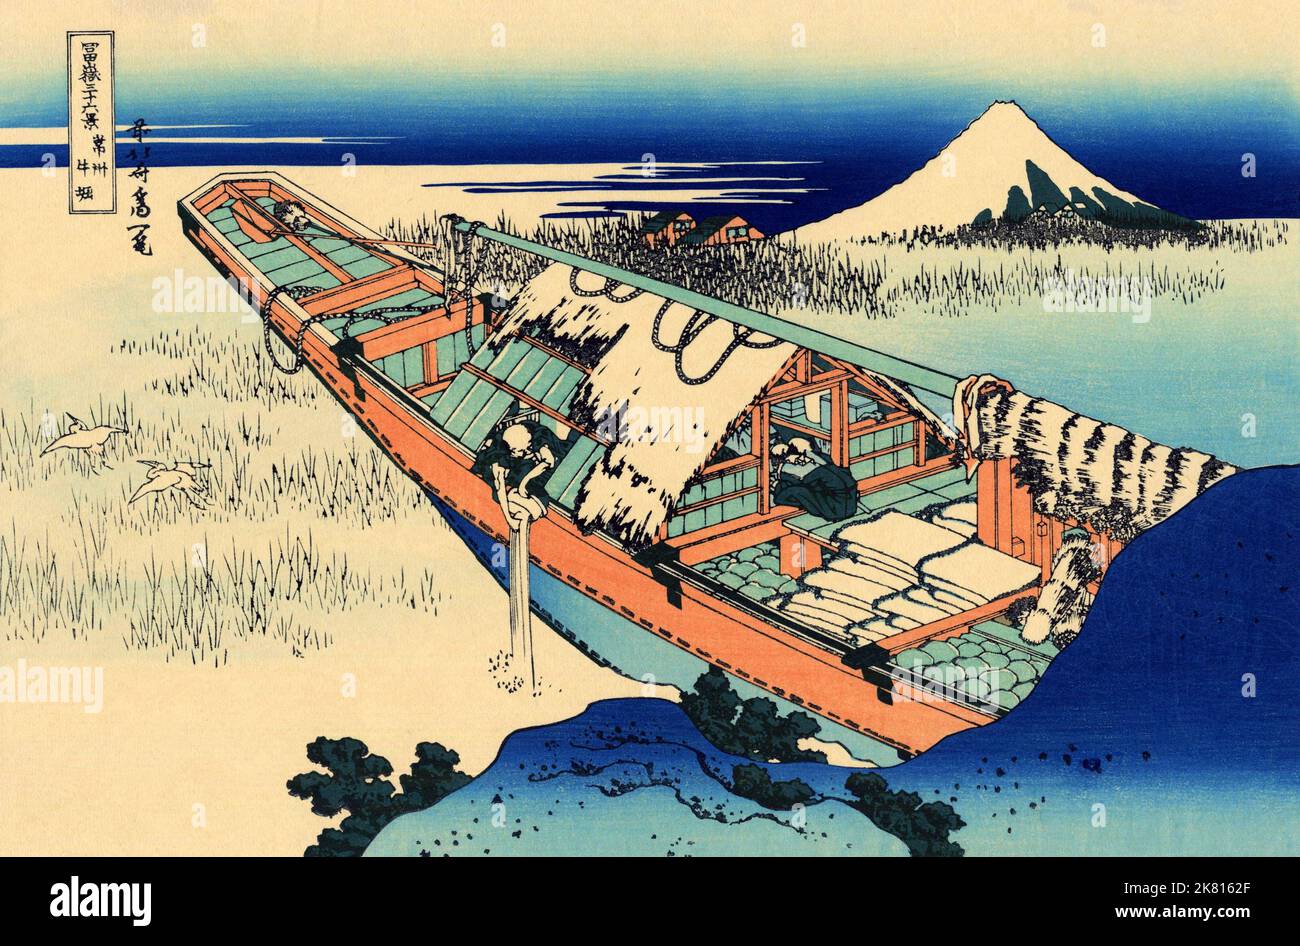 Japan: ‘Ushibori in Hitachi Province’. Ukiyo-e woodblock print from the series ‘Thirty-six Views of Mount Fuji’ by Katsushika Hokusai (31 October 1760 - 10 May 1849), c. 1830.  ‘36 Views of Mount Fuji’ is an ‘ukiyo-e’ series of large woodblock prints by the artist Katsushika Hokusai. The series depicts Mount Fuji in differing seasons and weather conditions from a variety of places and distances. It actually consists of 46 prints created between 1826 and 1833. The first 36 were included in the original publication and, due to their popularity, 10 more were added after the original publication. Stock Photo